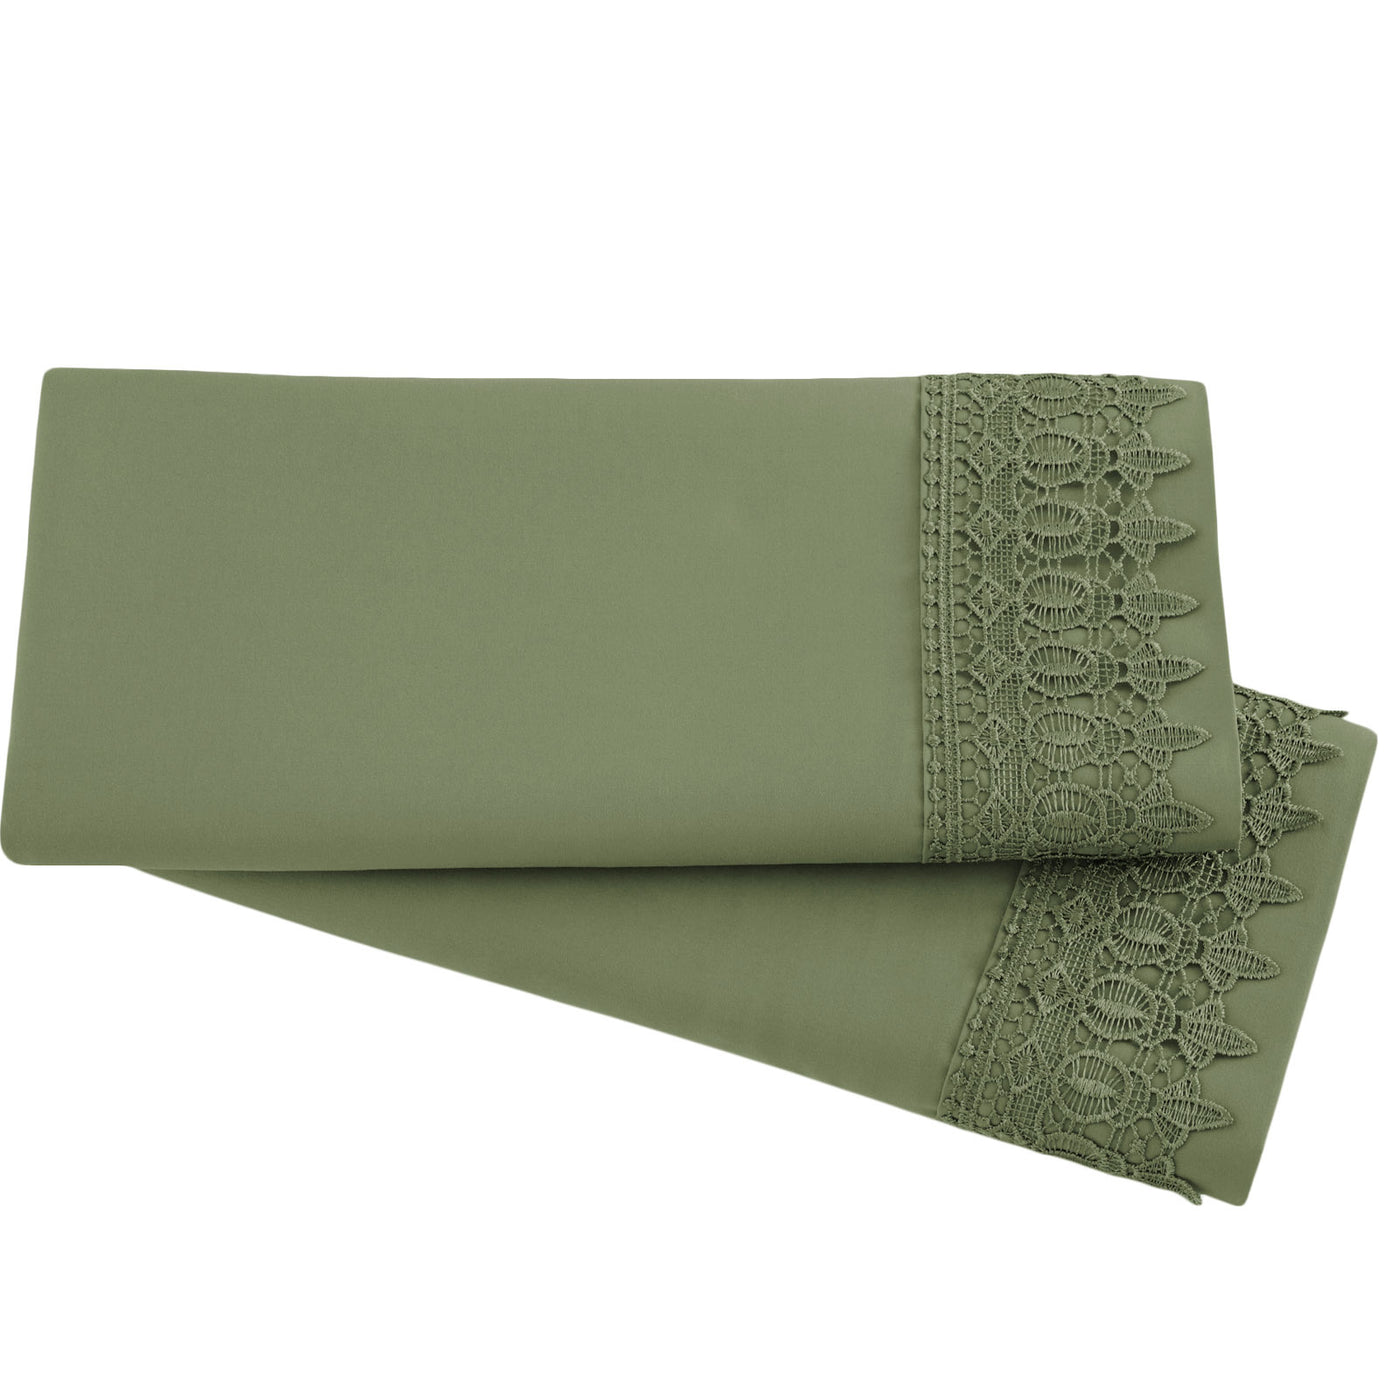 2-Piece Lace Pillowcase Set in Sage Green